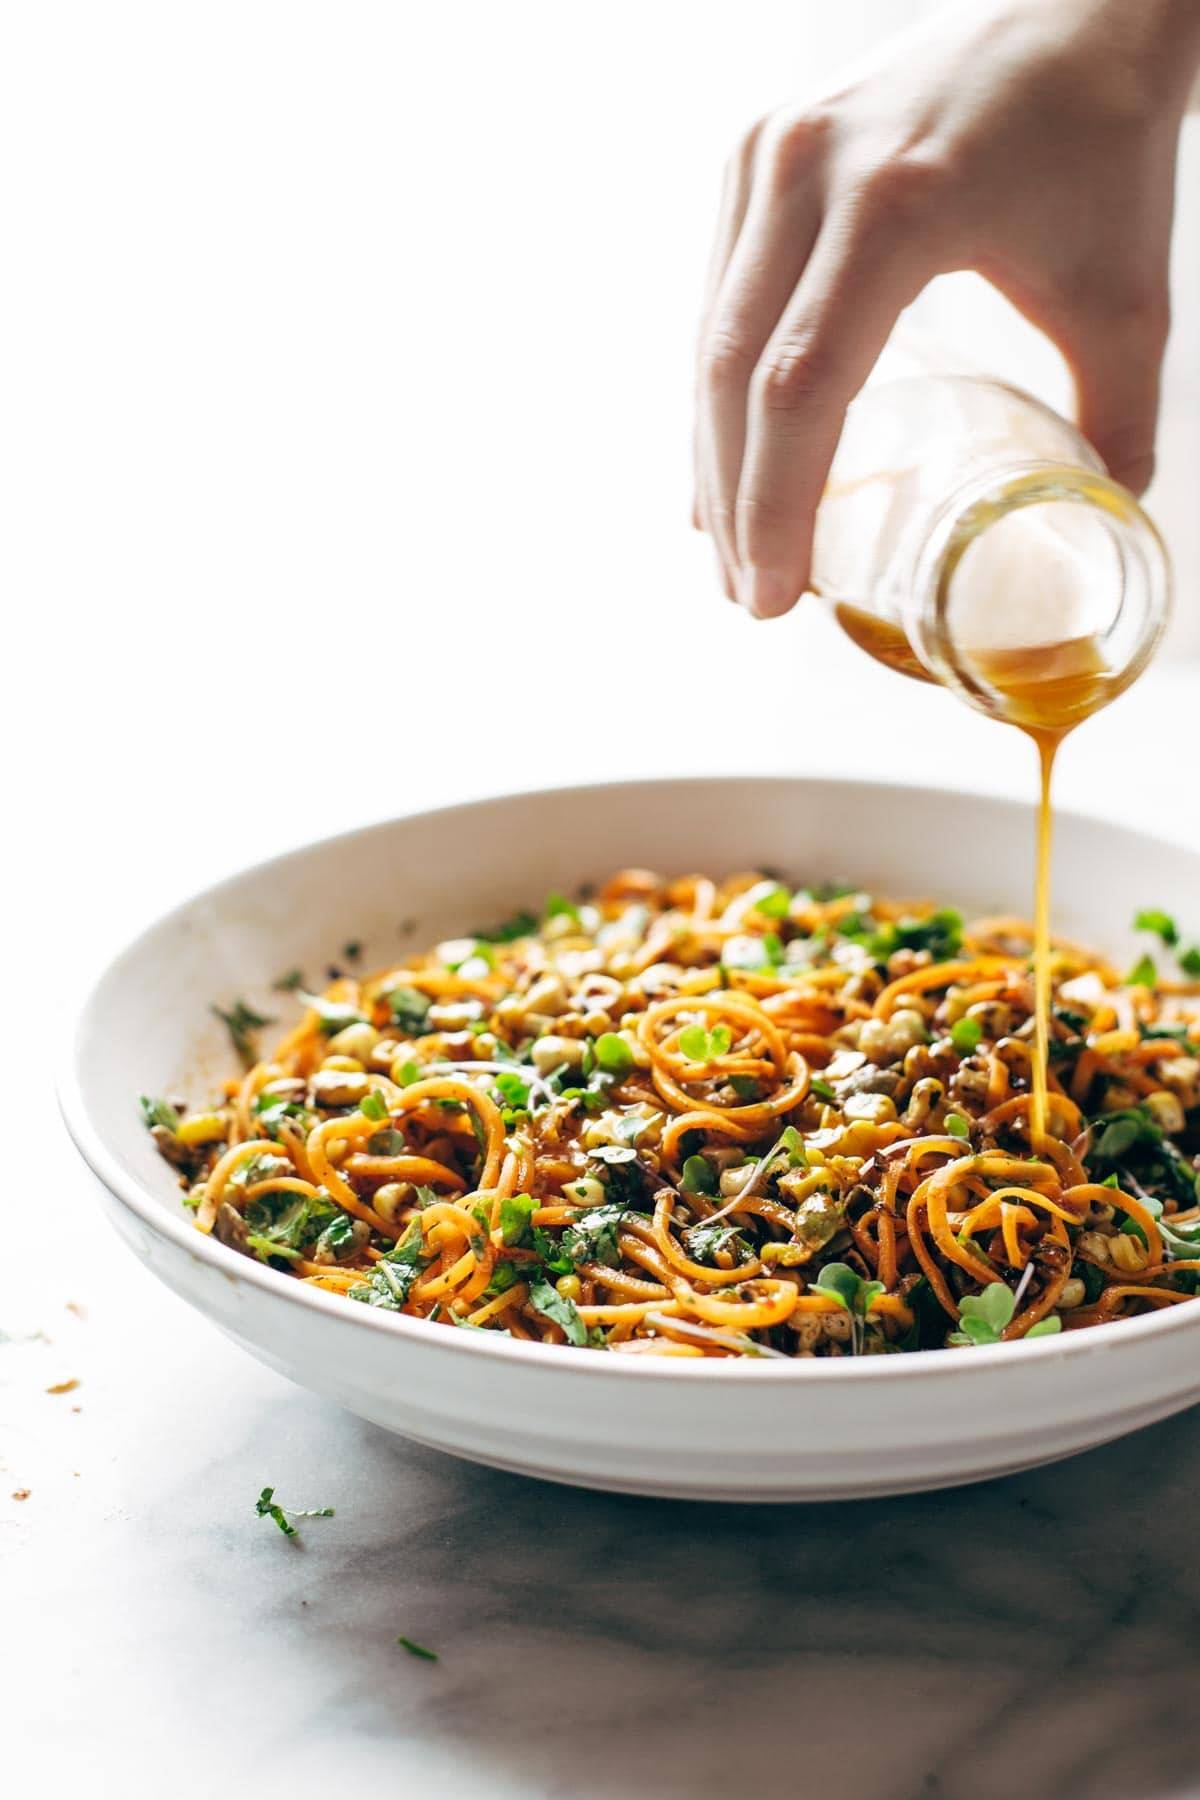 Sweet potato noodle salad in a bowl drizzled with sauce.